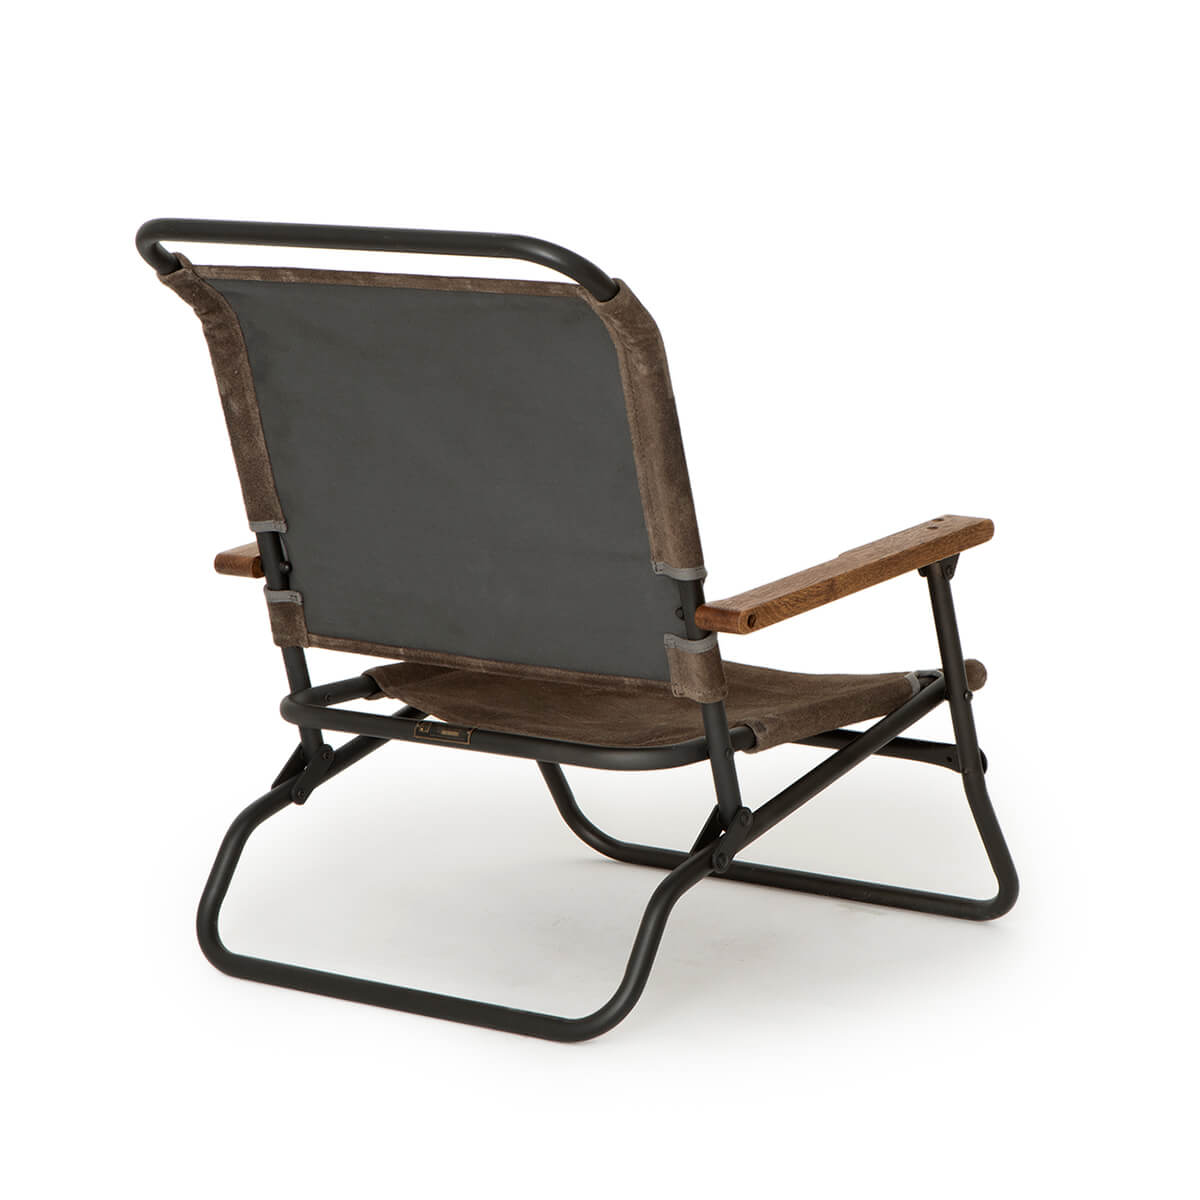 WATERPROOF LEATHER FOLDING CHAIR by TRUCK FURNITURE | hobo